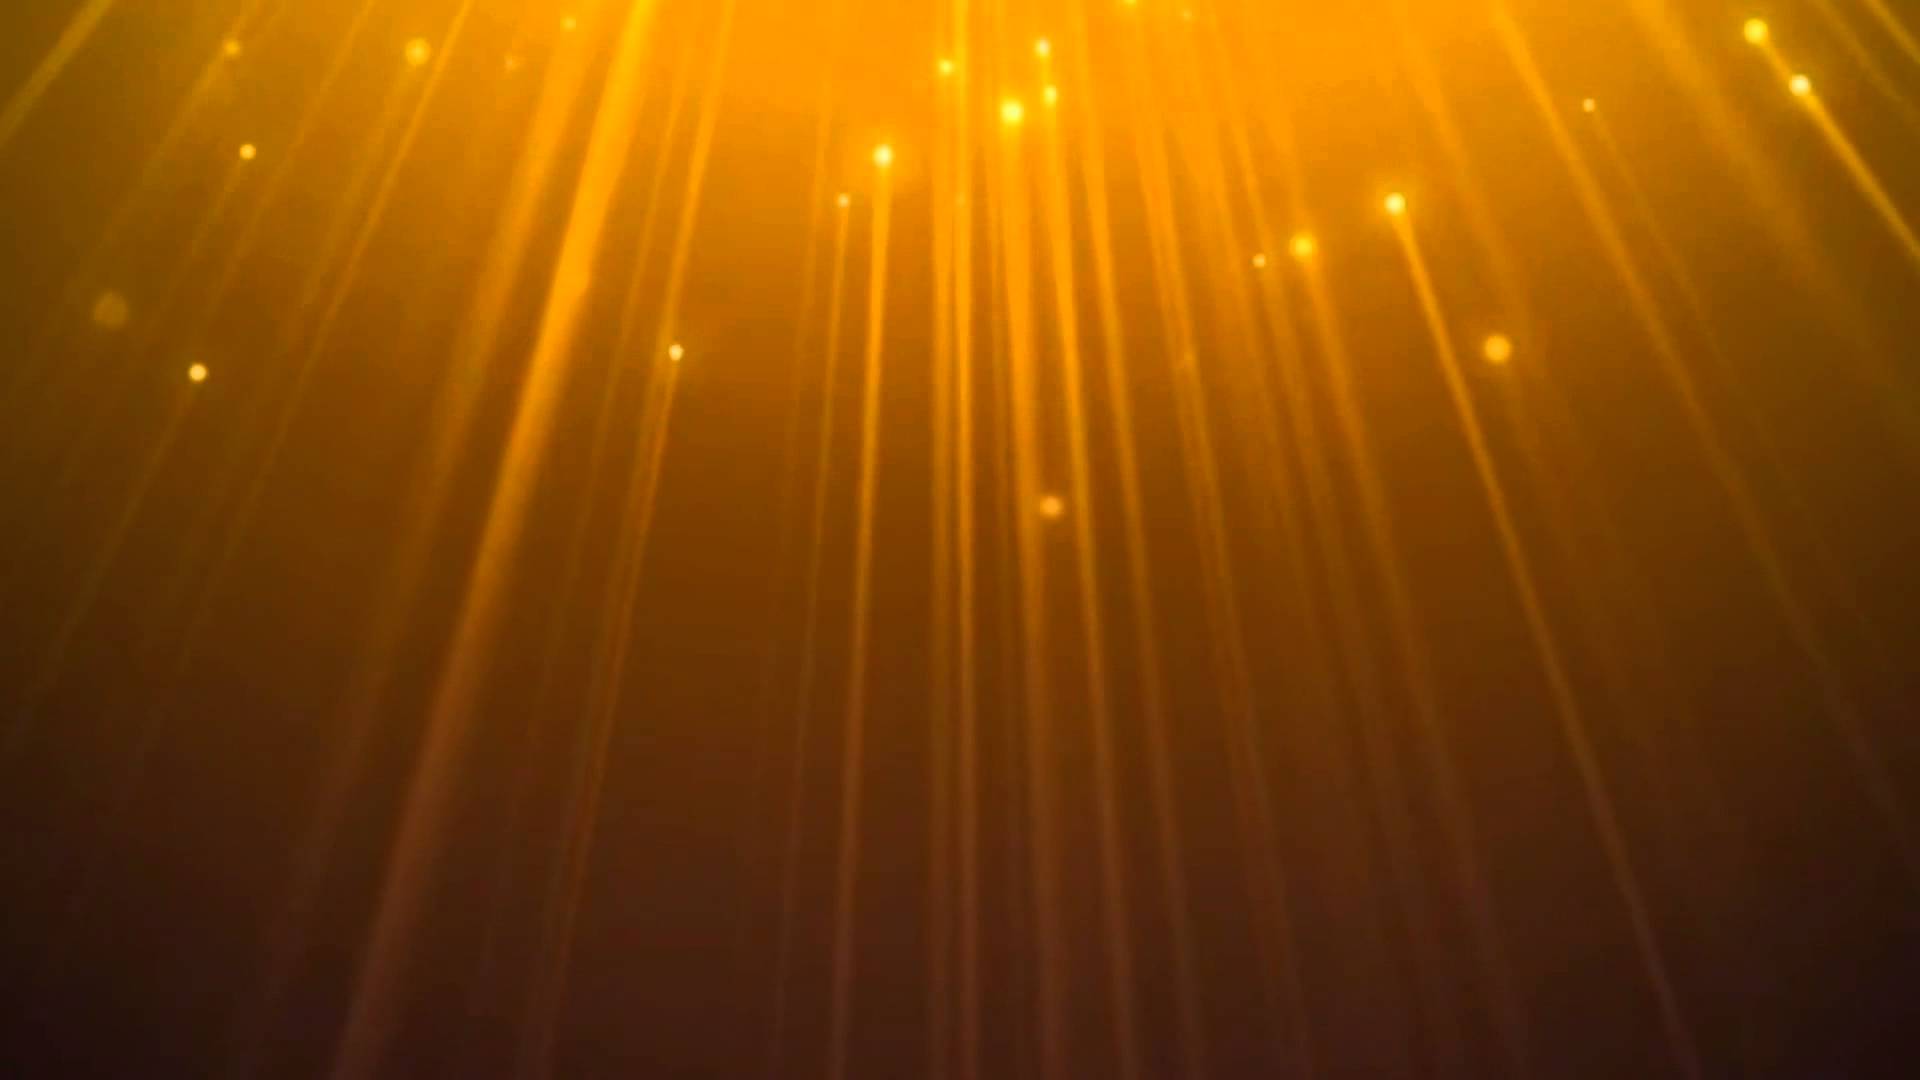   Free Creative Commons motion background video 1080p HD worship